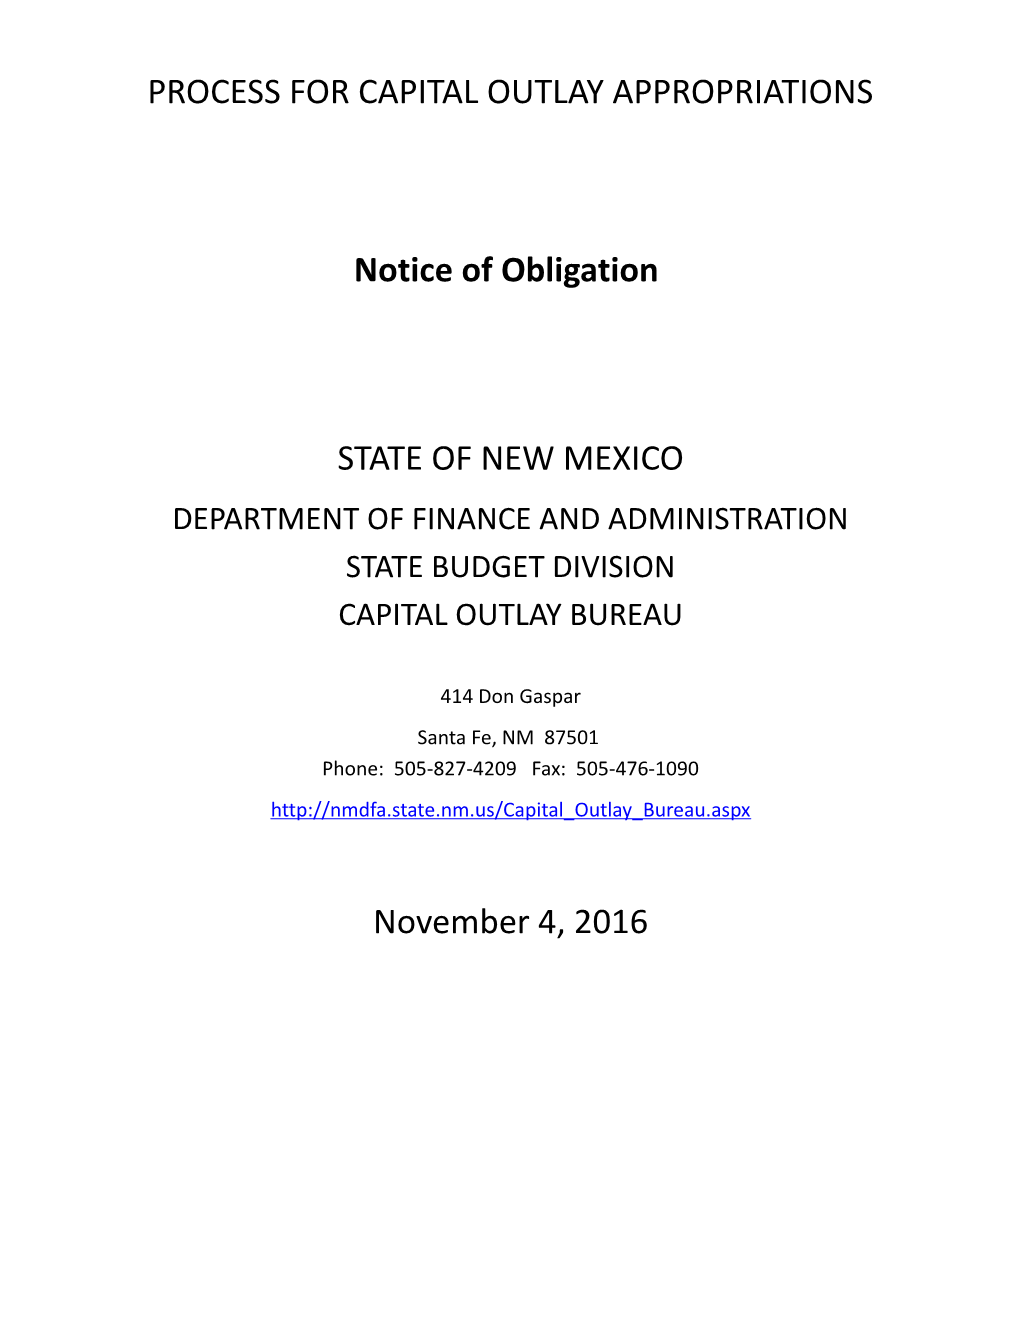 Process for Capital Outlay Appropriations